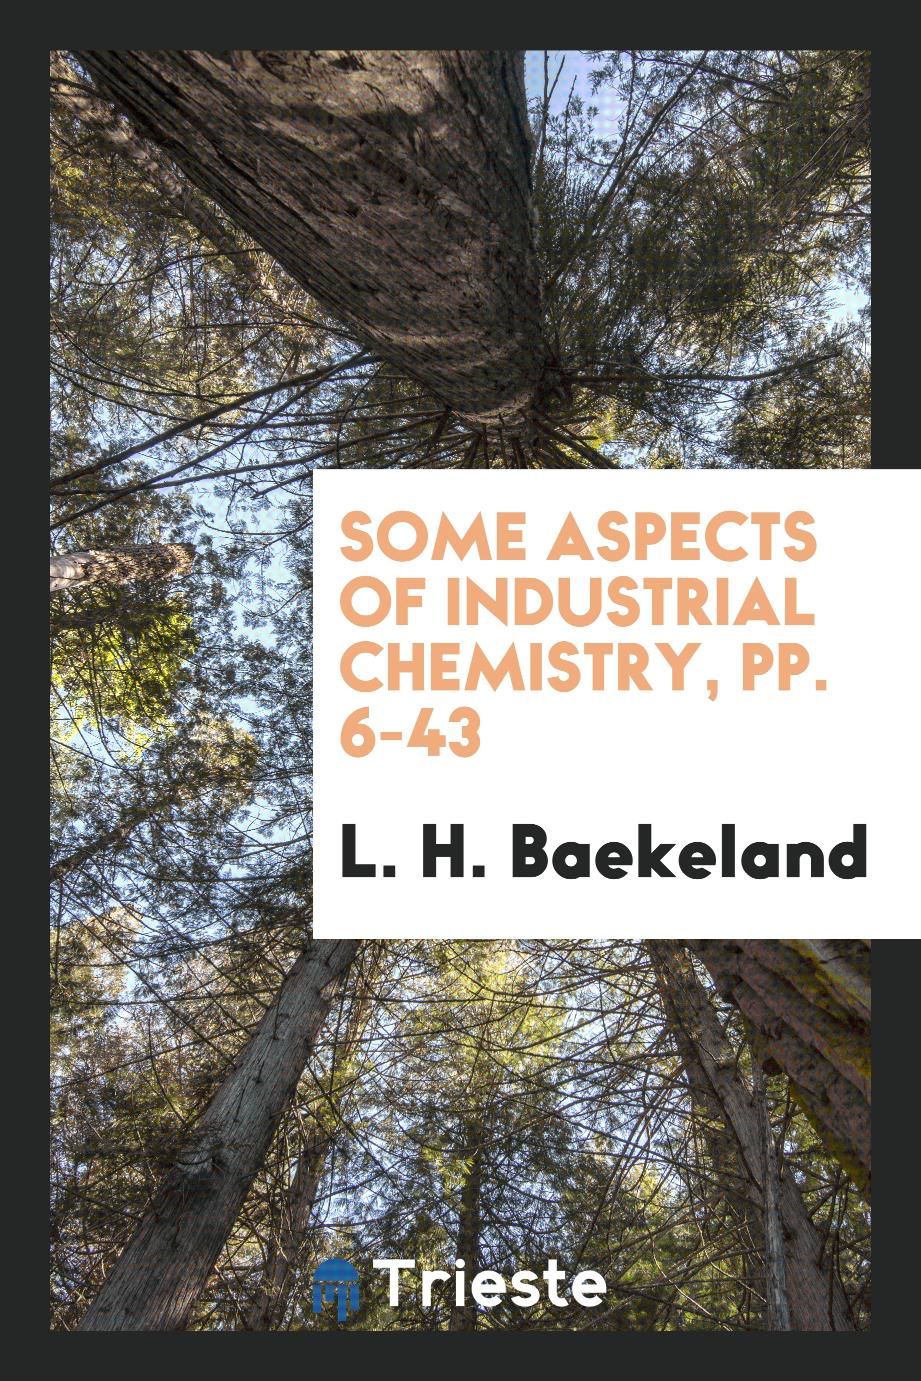 Some Aspects of Industrial Chemistry, pp. 6-43